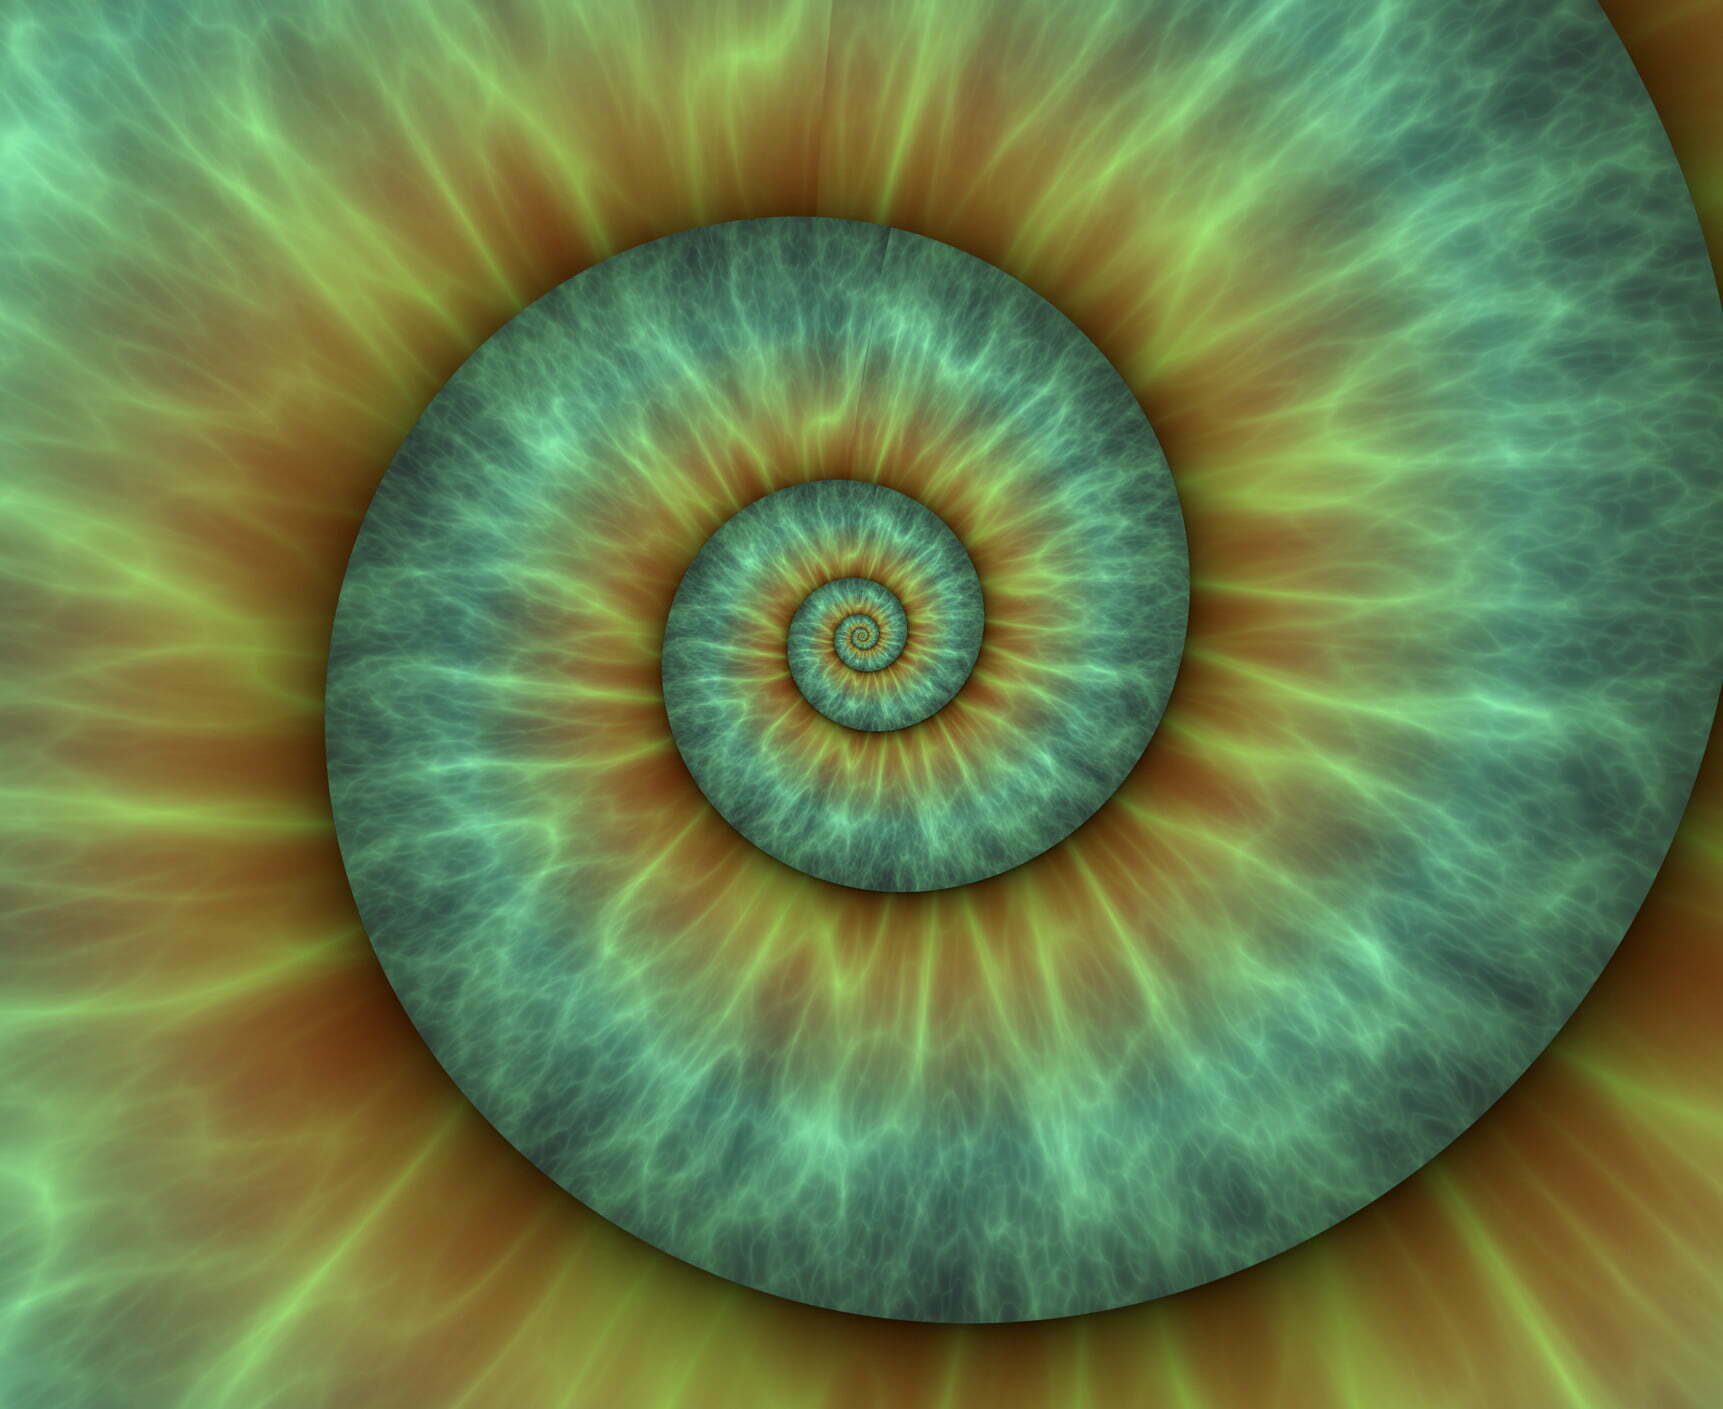 Journeying sprial image